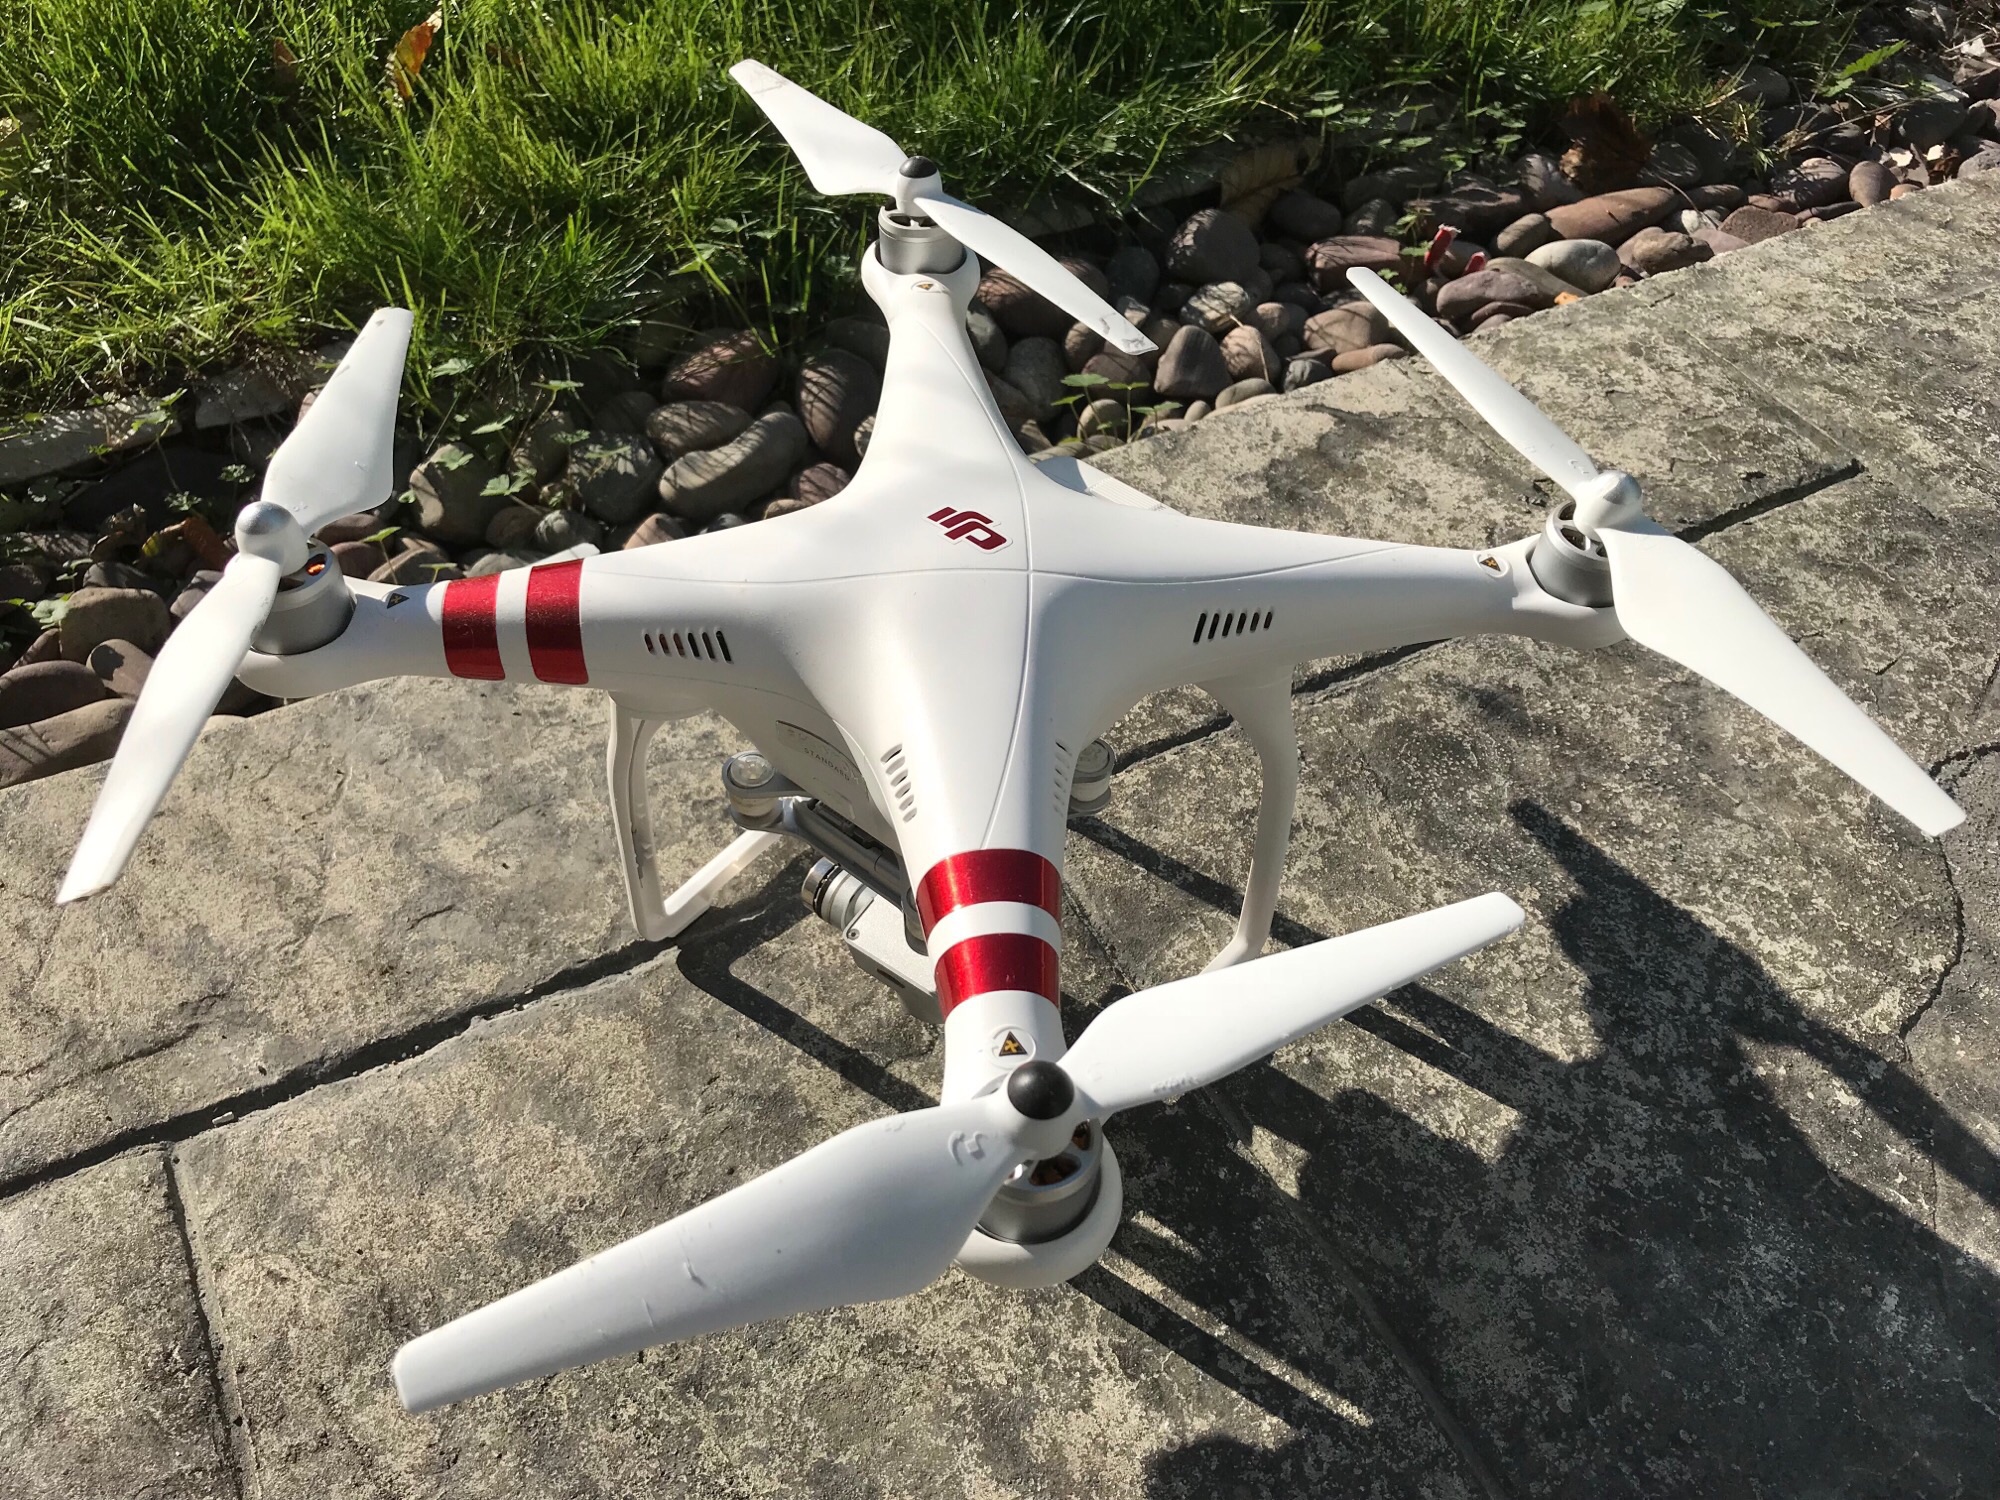 Insurance for your drone in Bremerton, WA